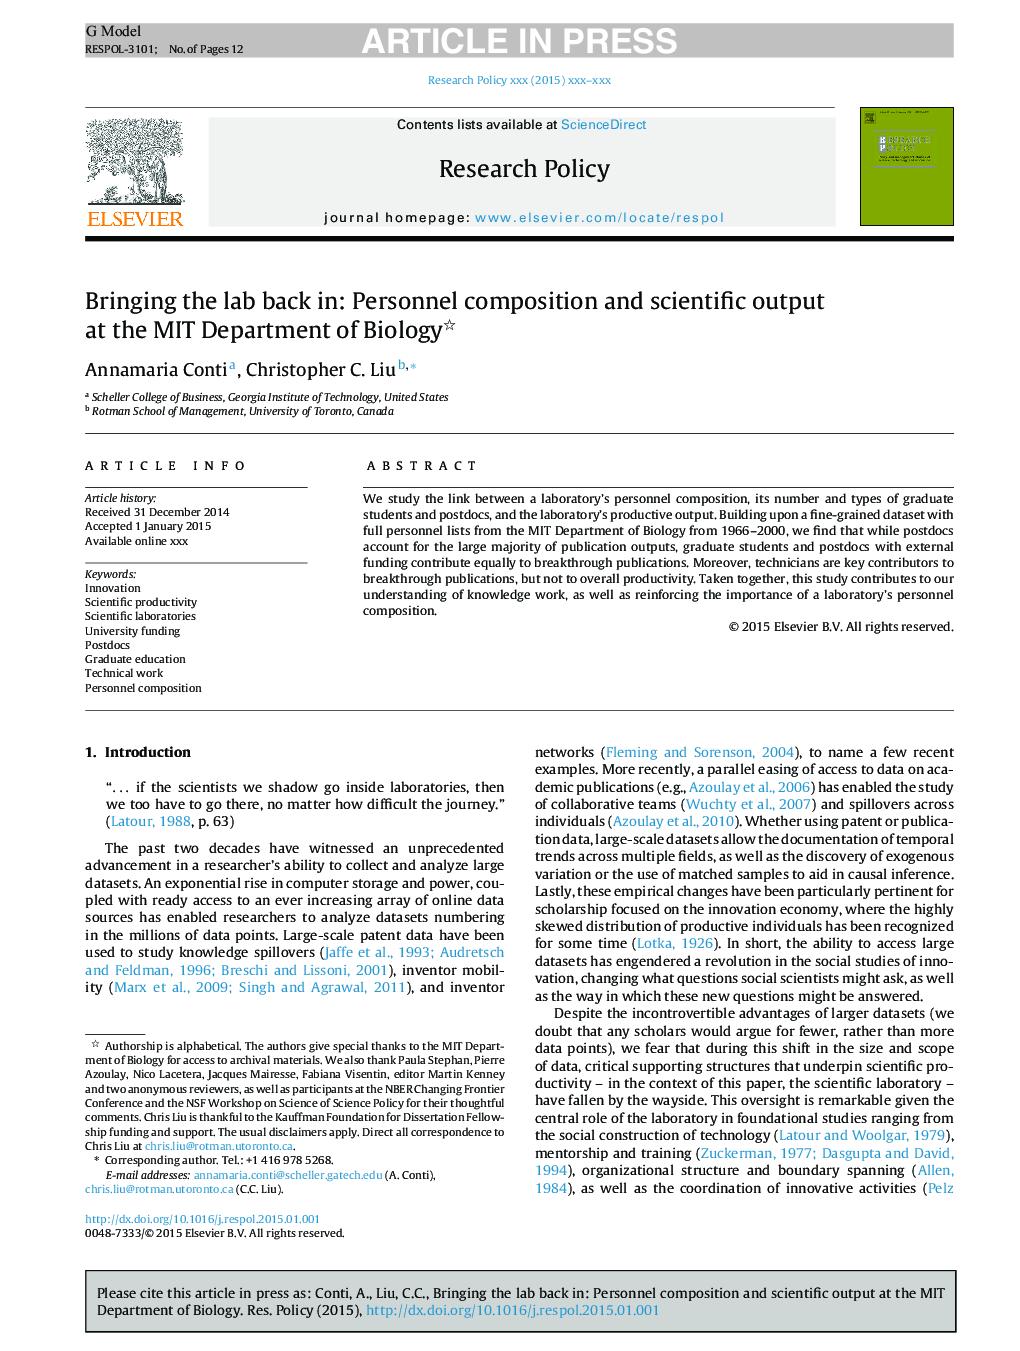 Bringing the lab back in: Personnel composition and scientific output at the MIT Department of Biology